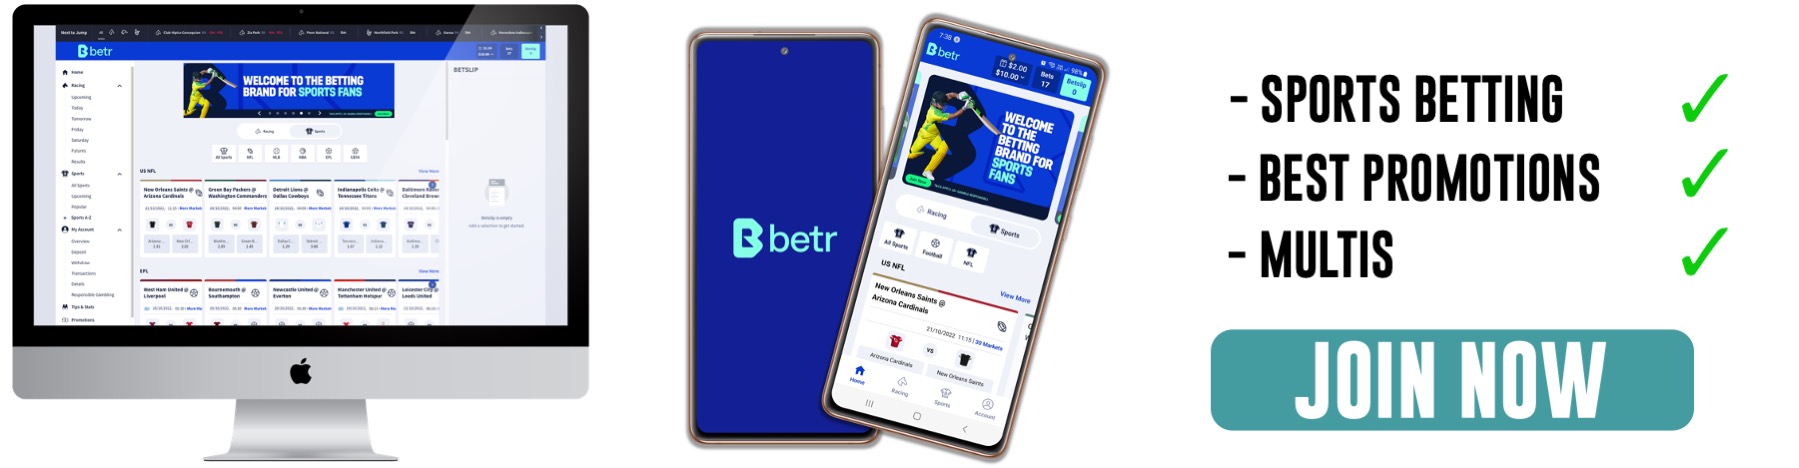 Betr Sports Betting Site